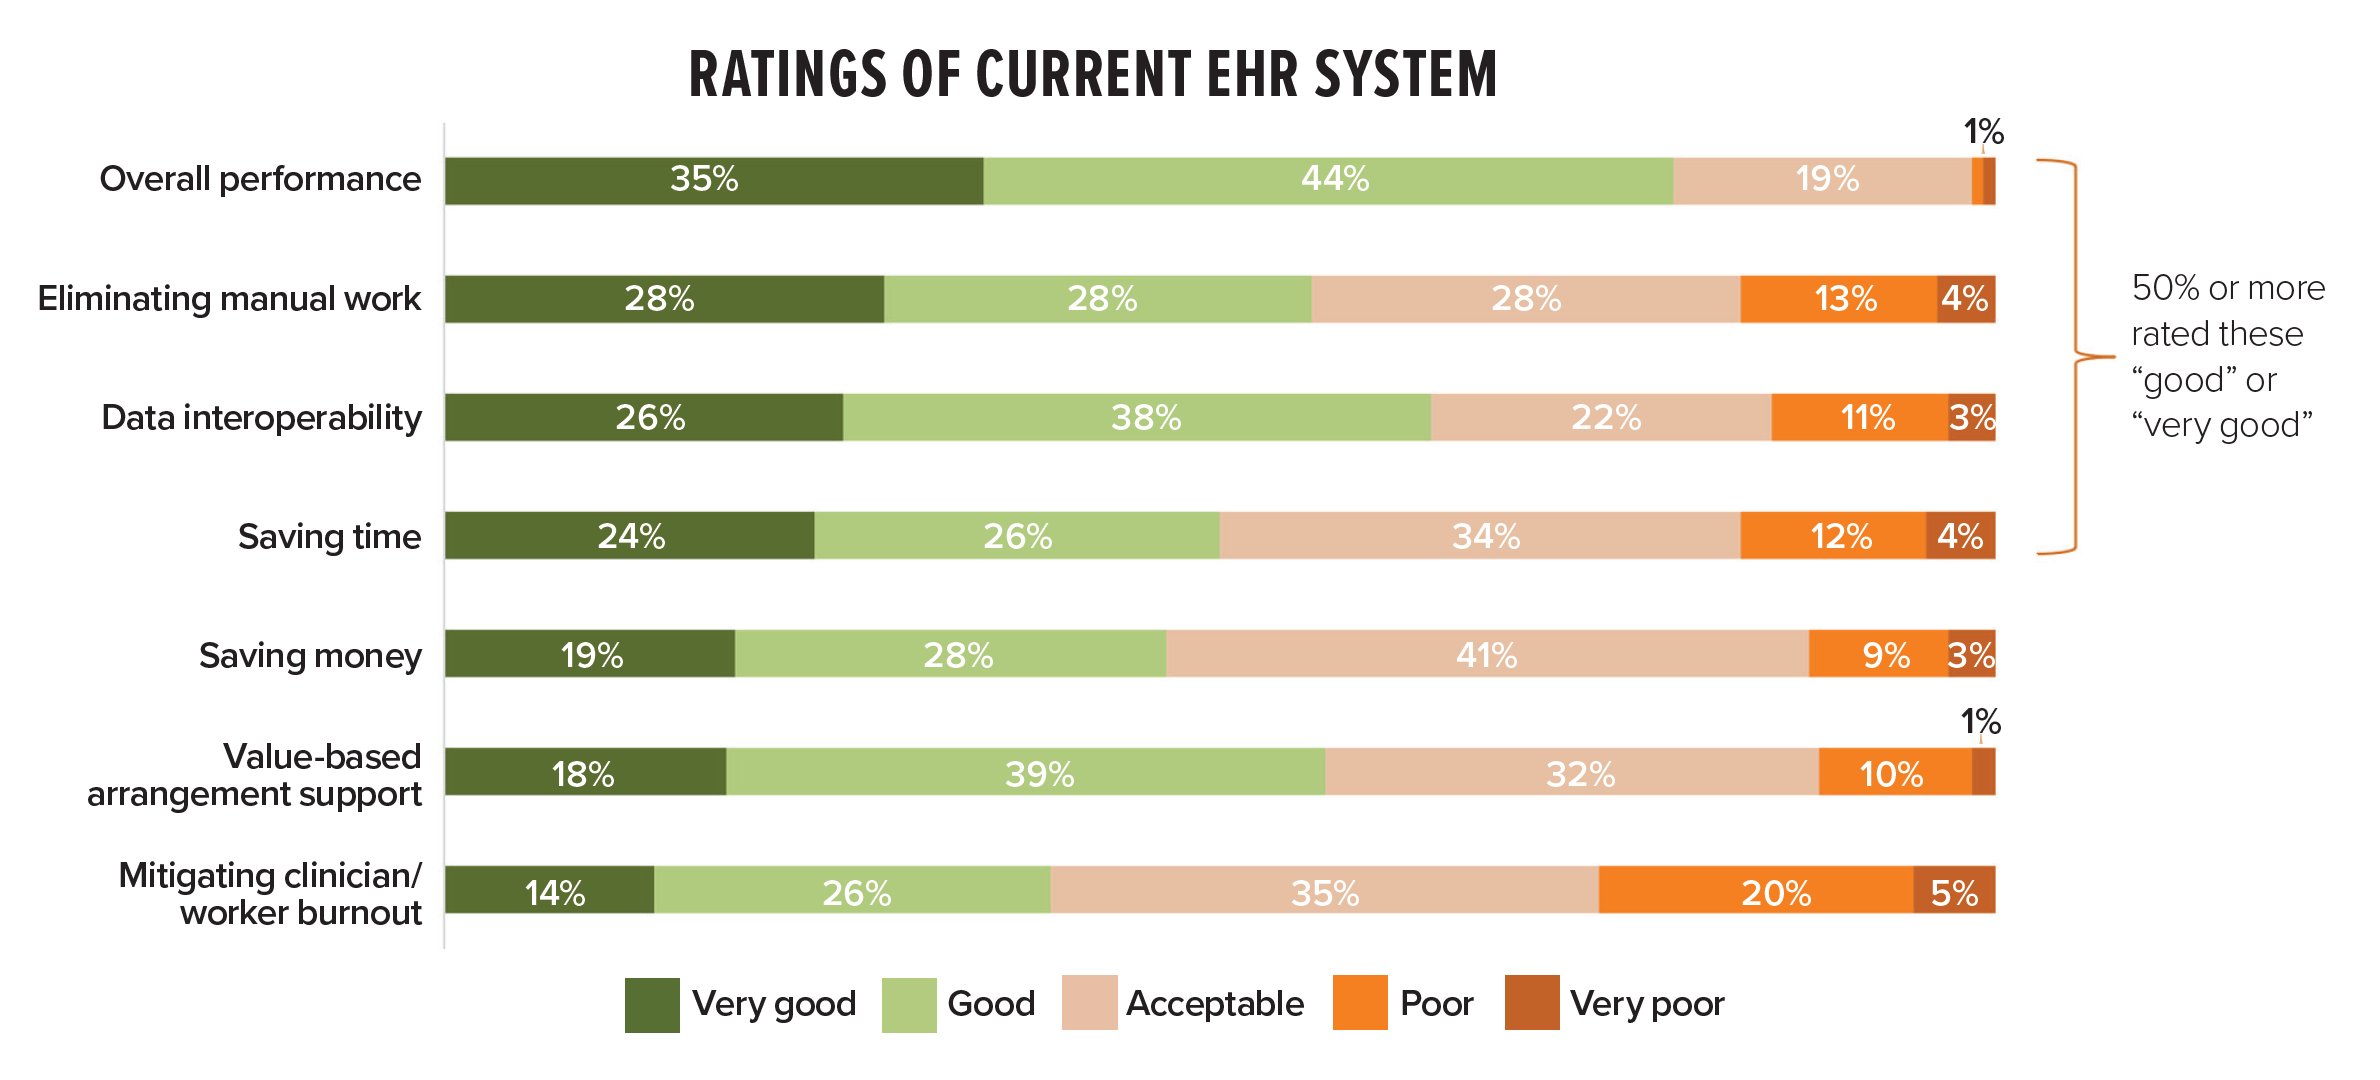 Results from survey asking respondents to rate their current EHR system.